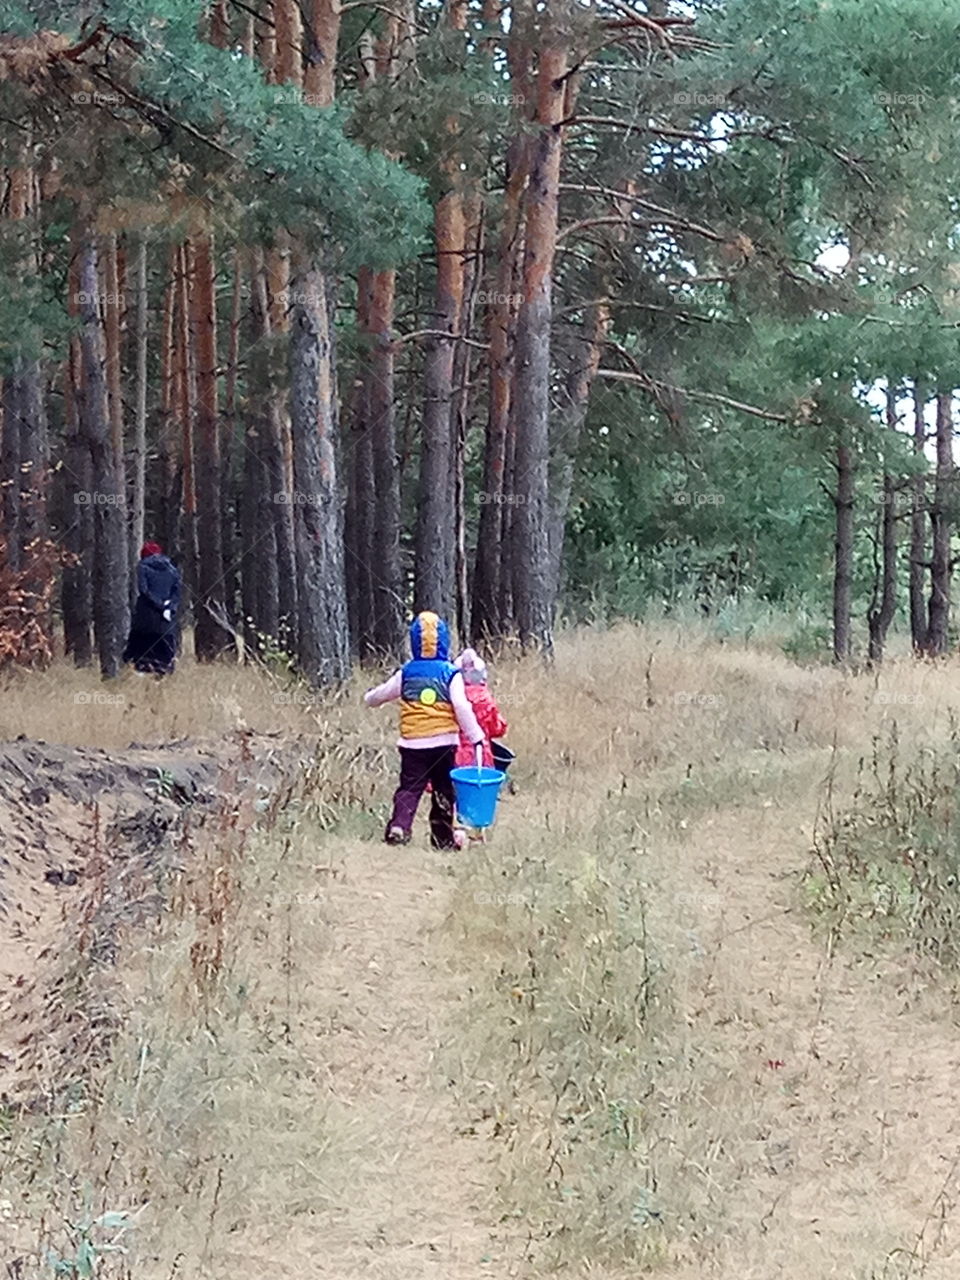 beautiful place - forest,  special for kids ..